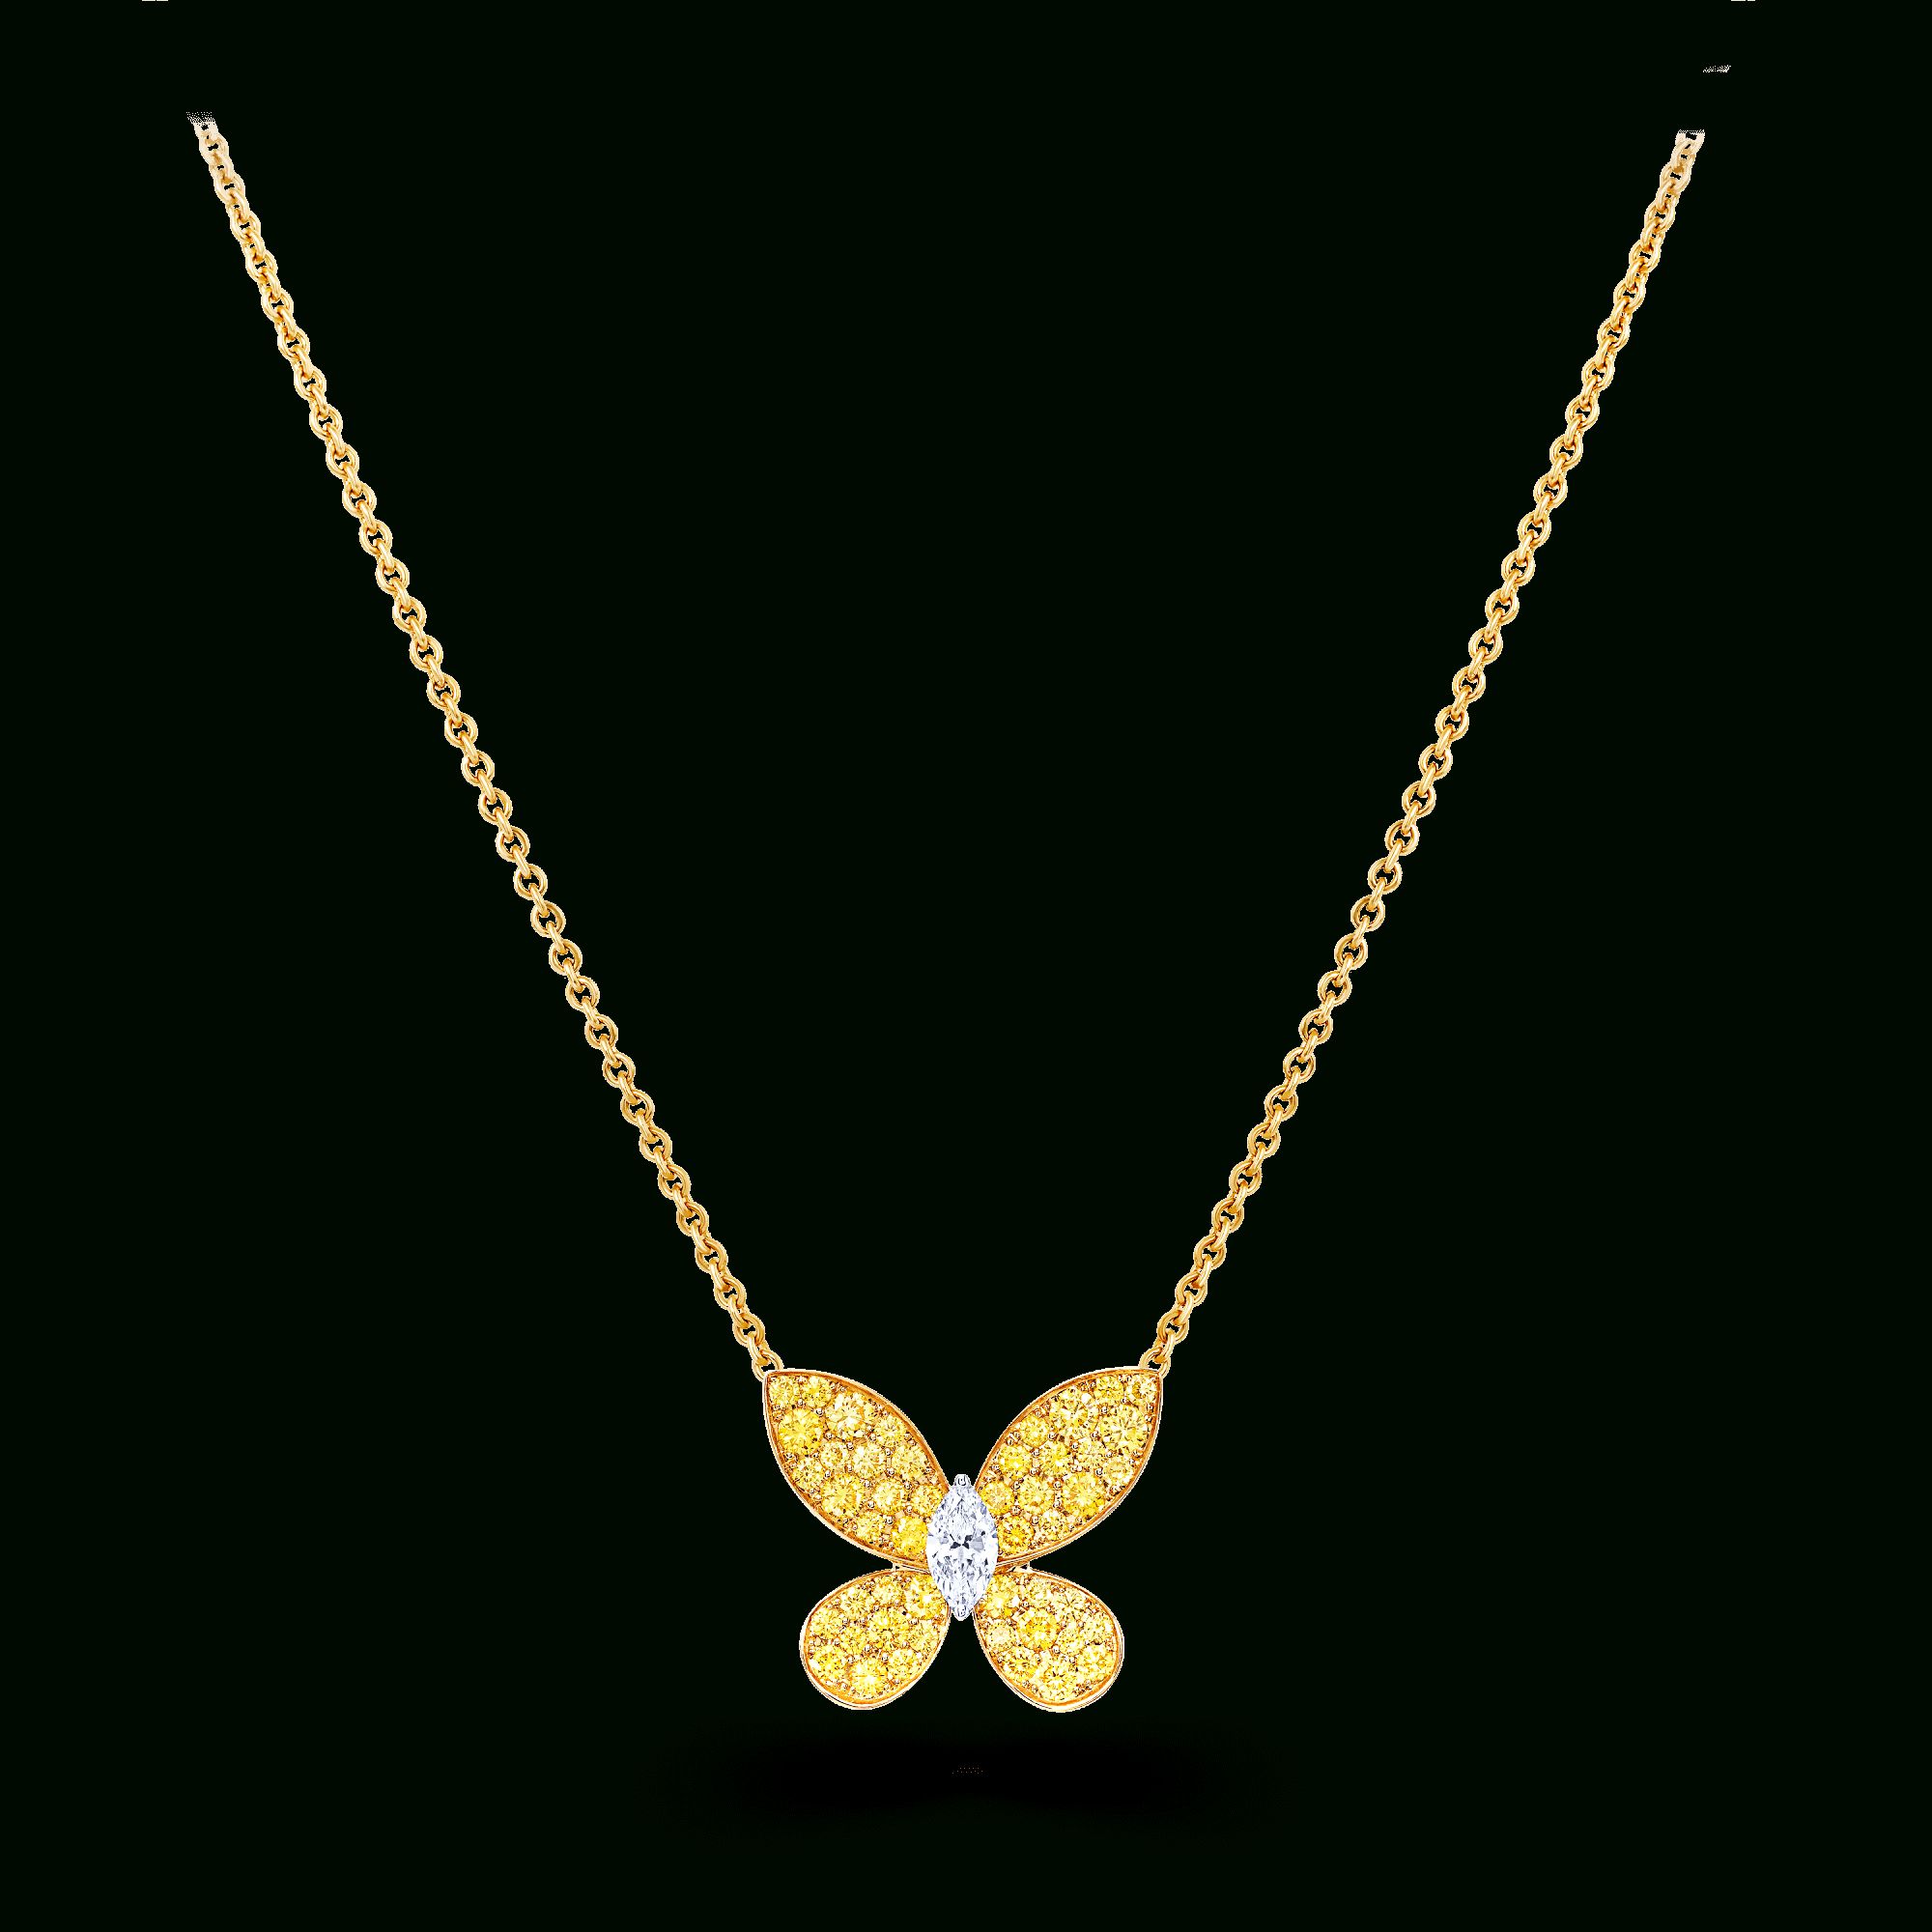 Pavé Butterfly Pendant, Yellow And White Diamond | Graff Within 2019 Pavé Butterfly Pendant Necklaces (View 1 of 25)